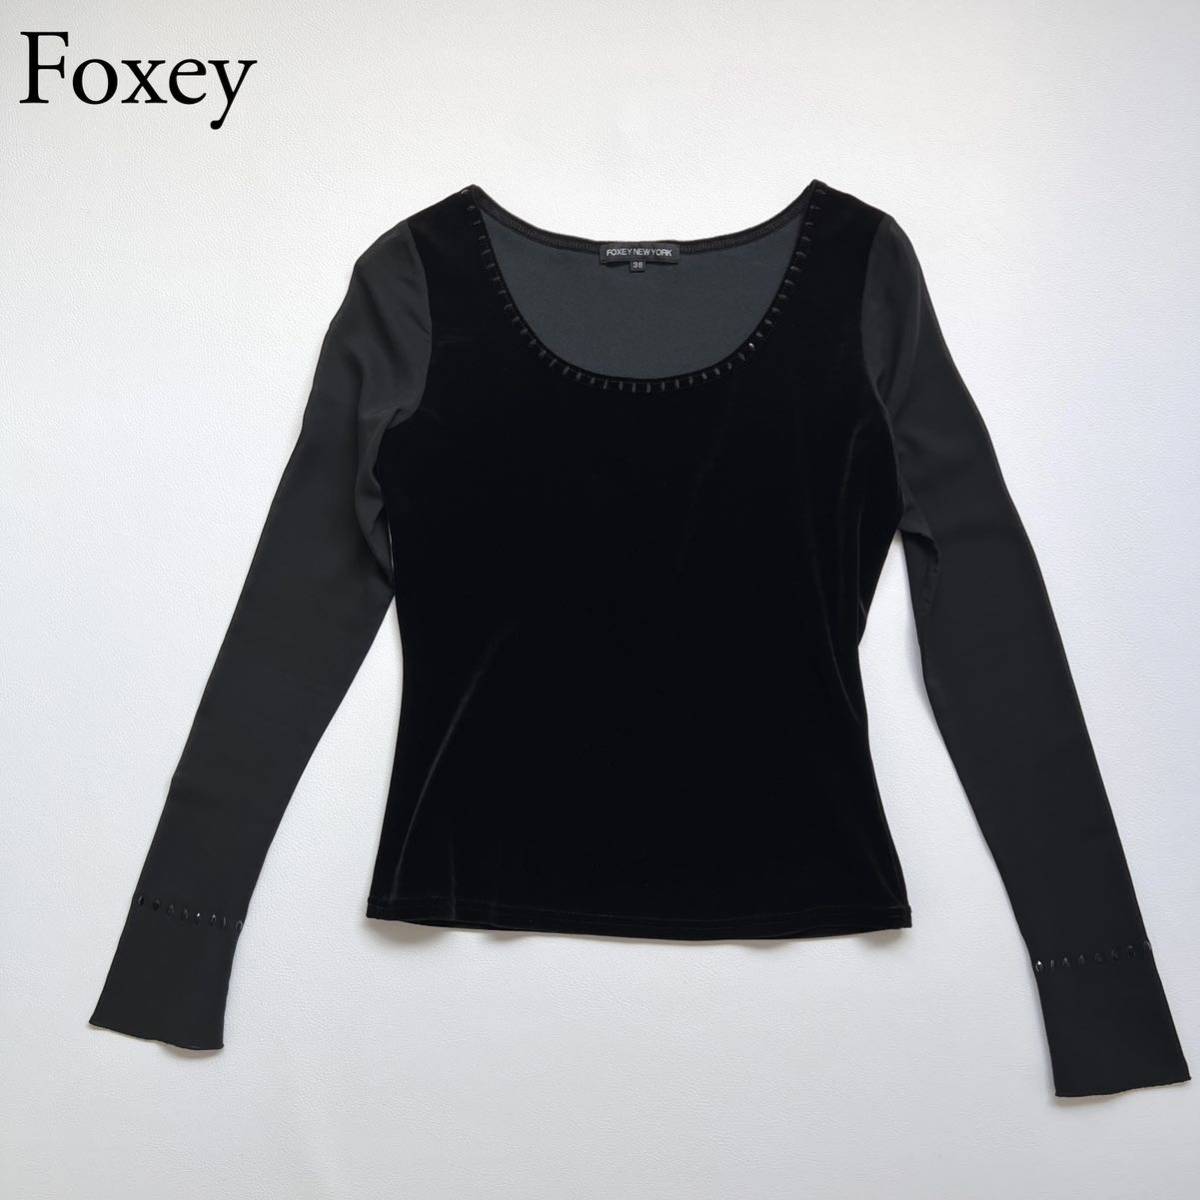 FOXEY NEW YORK フォクシーニューヨーク トップス カットソー Tシャツ